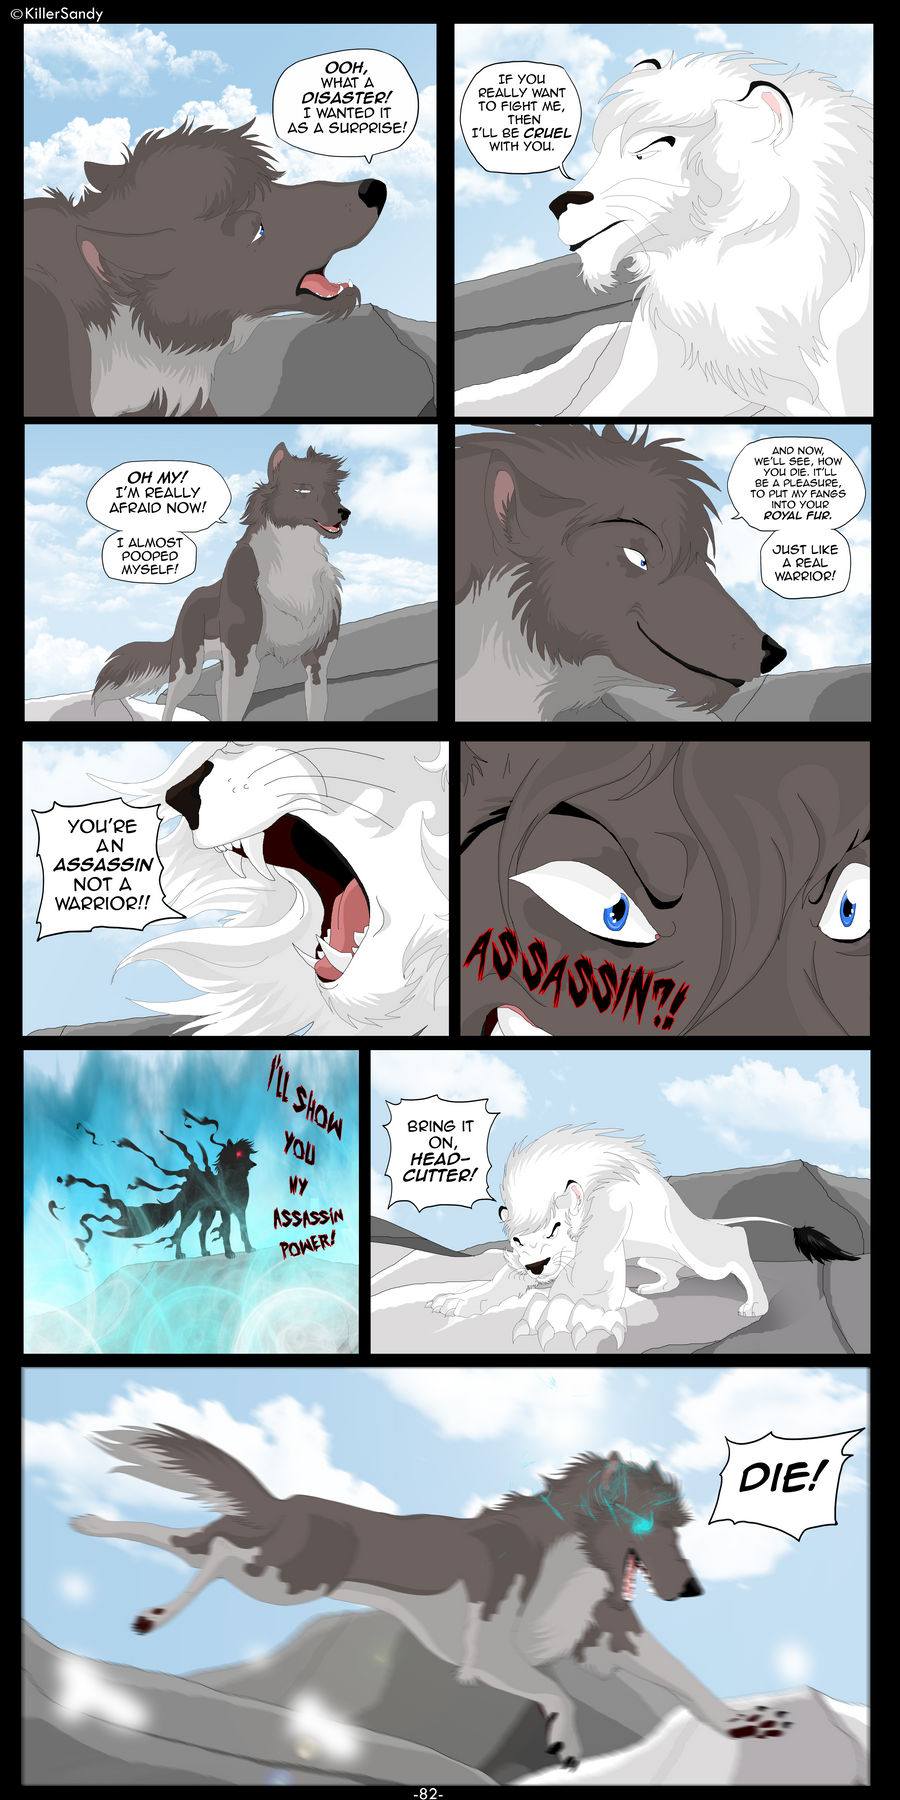 The Prince of the Moonlight Stone page 82